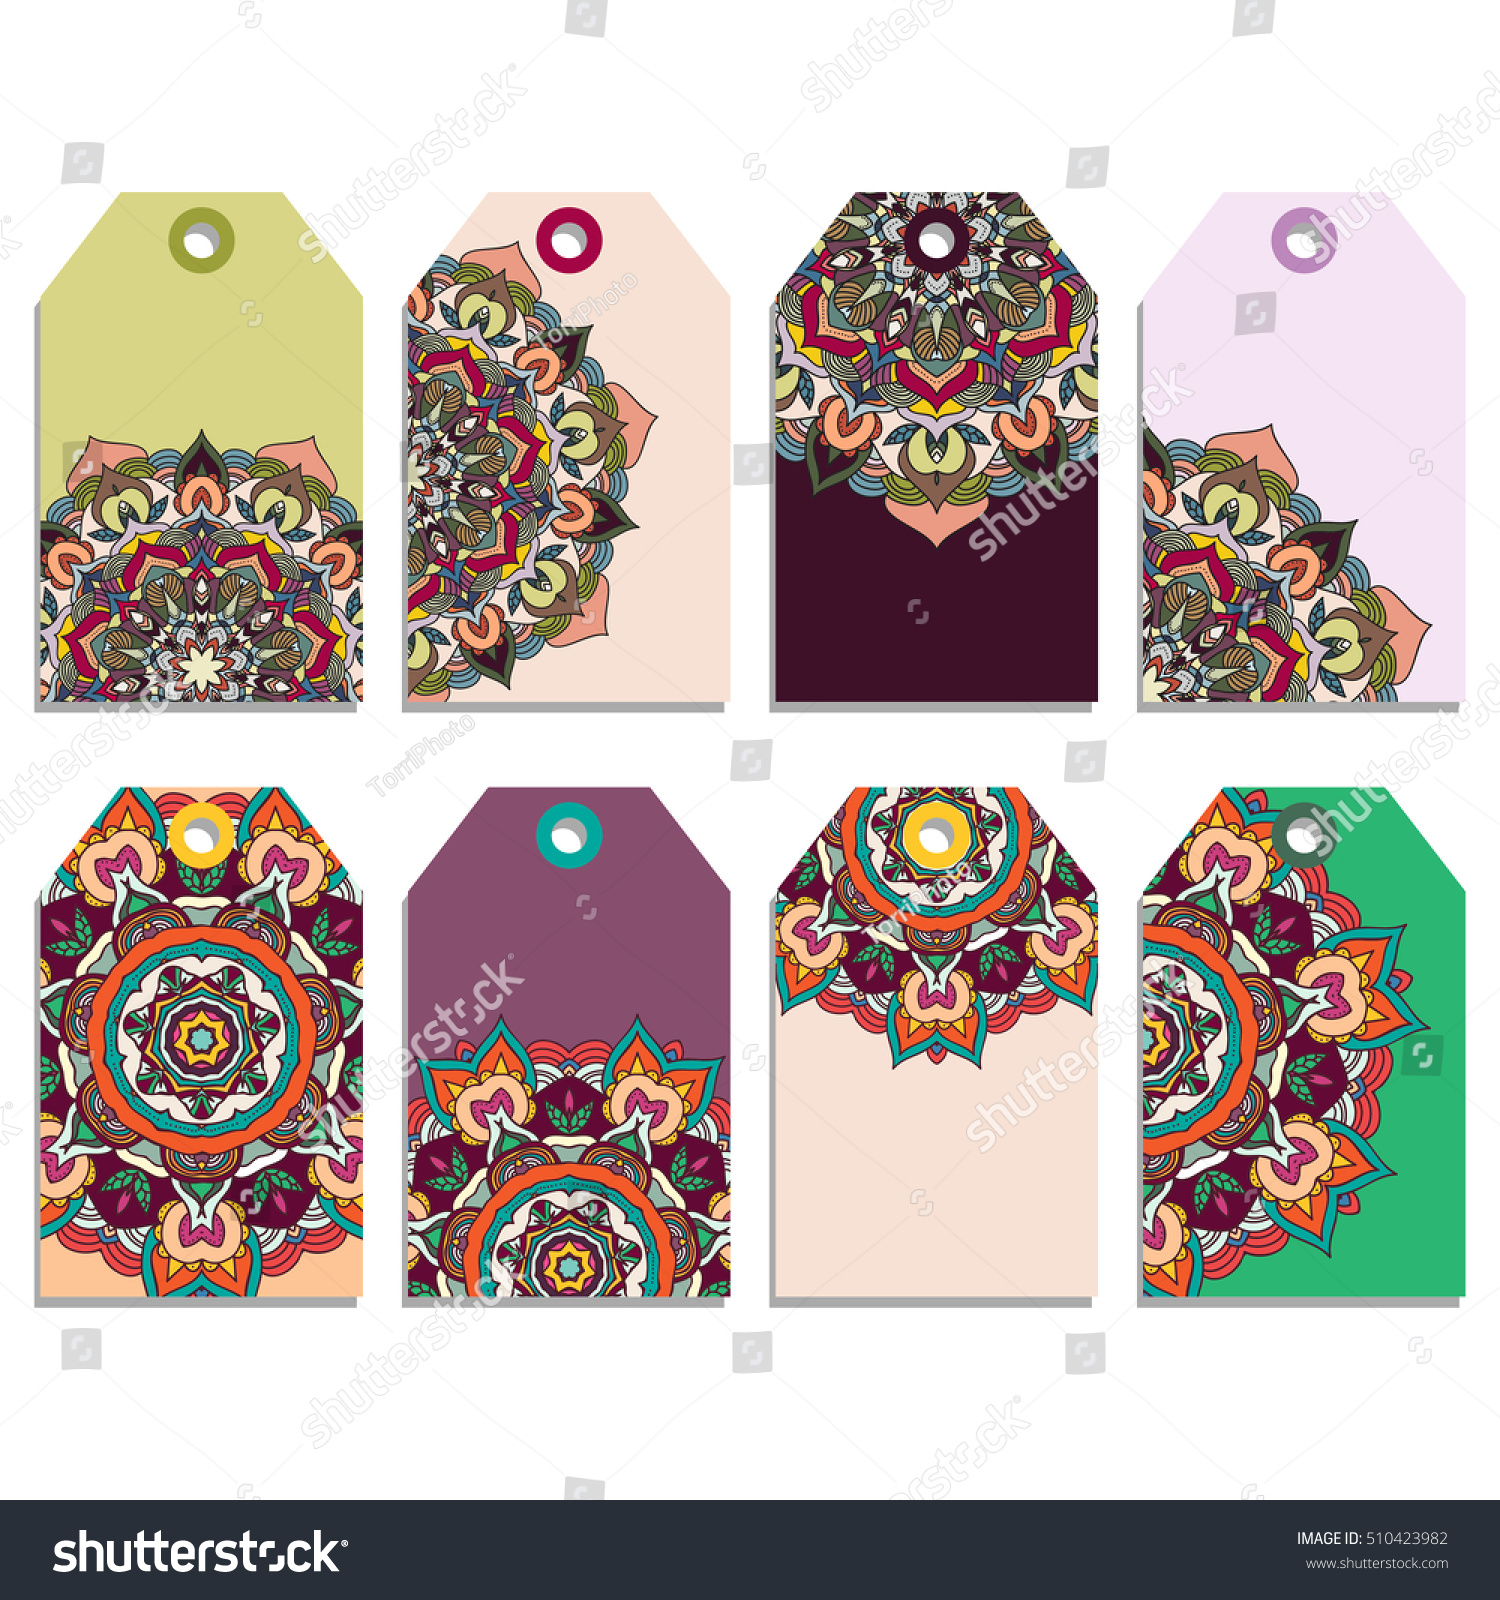 https://www.shutterstock.com/pic-510423982/stock-vector-set-of-gift-tags-with-colorful-mandala-design-vector-illustration-eps-8.html?